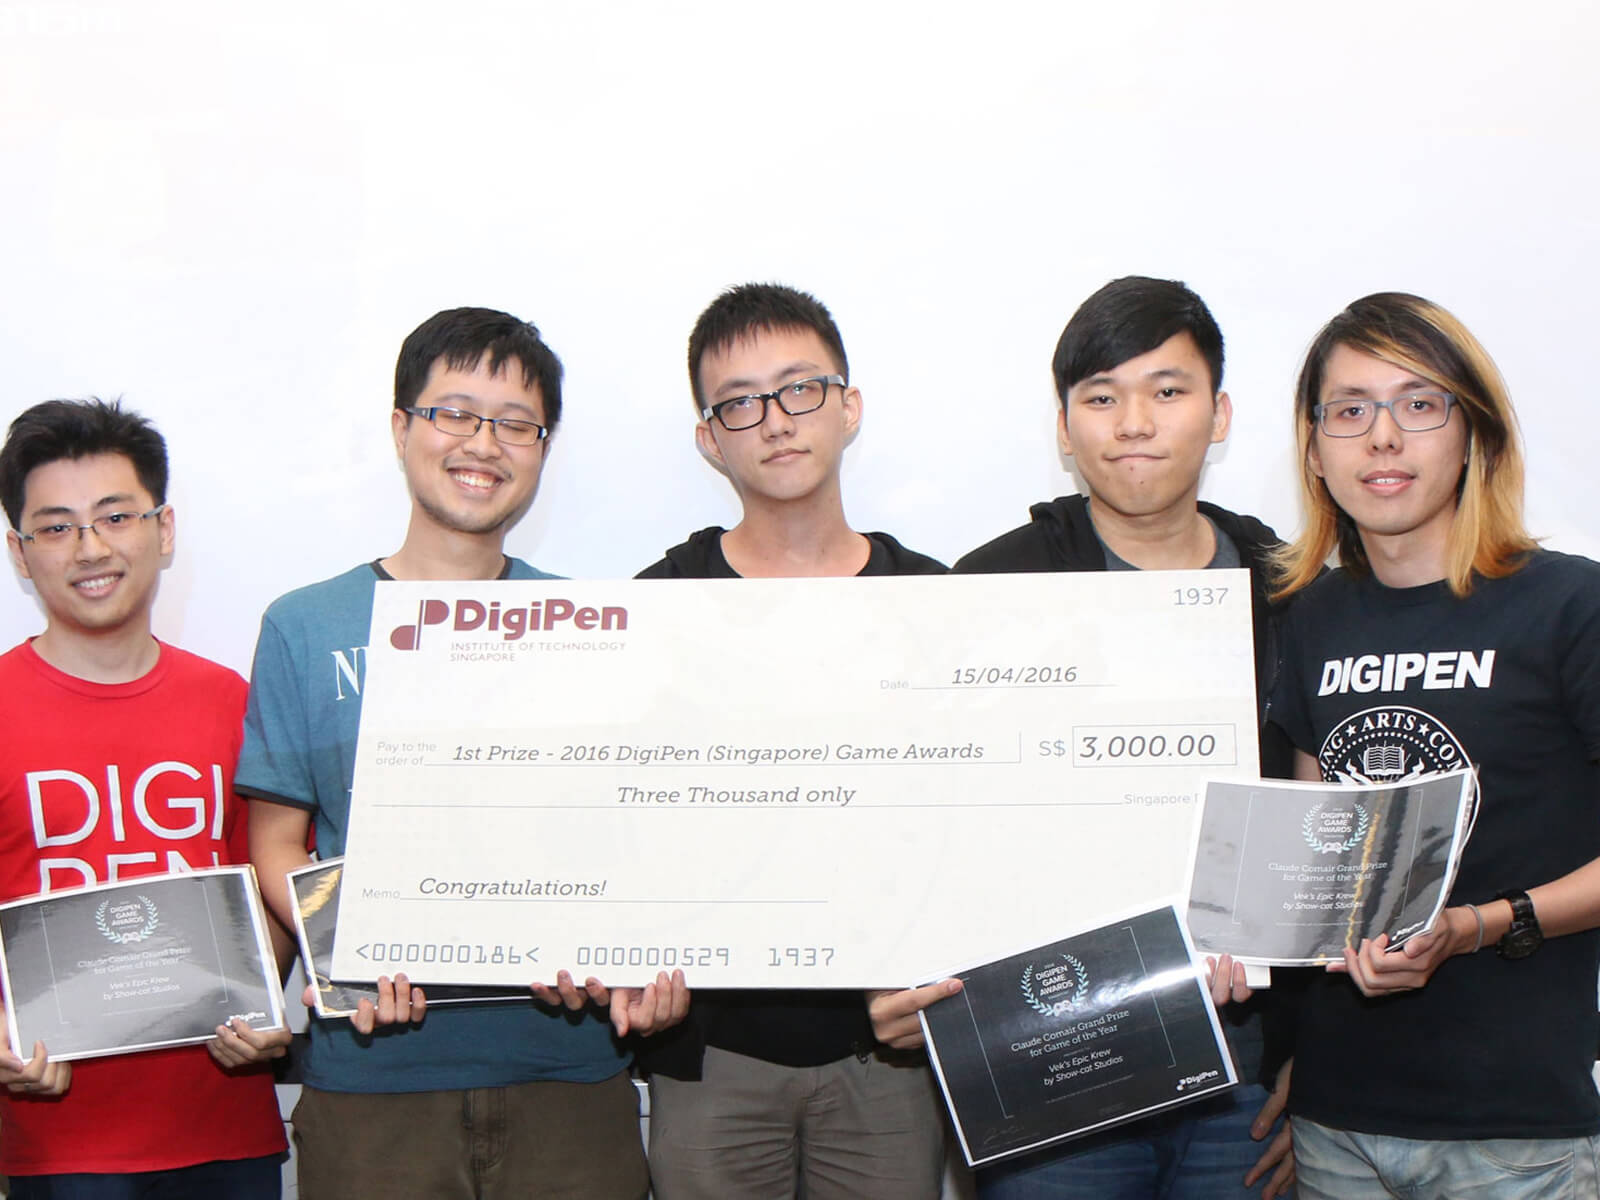 Students in the DigiPen (Singapore) Game Awards pose for a picture with certificates and a giant novelty check for $3000